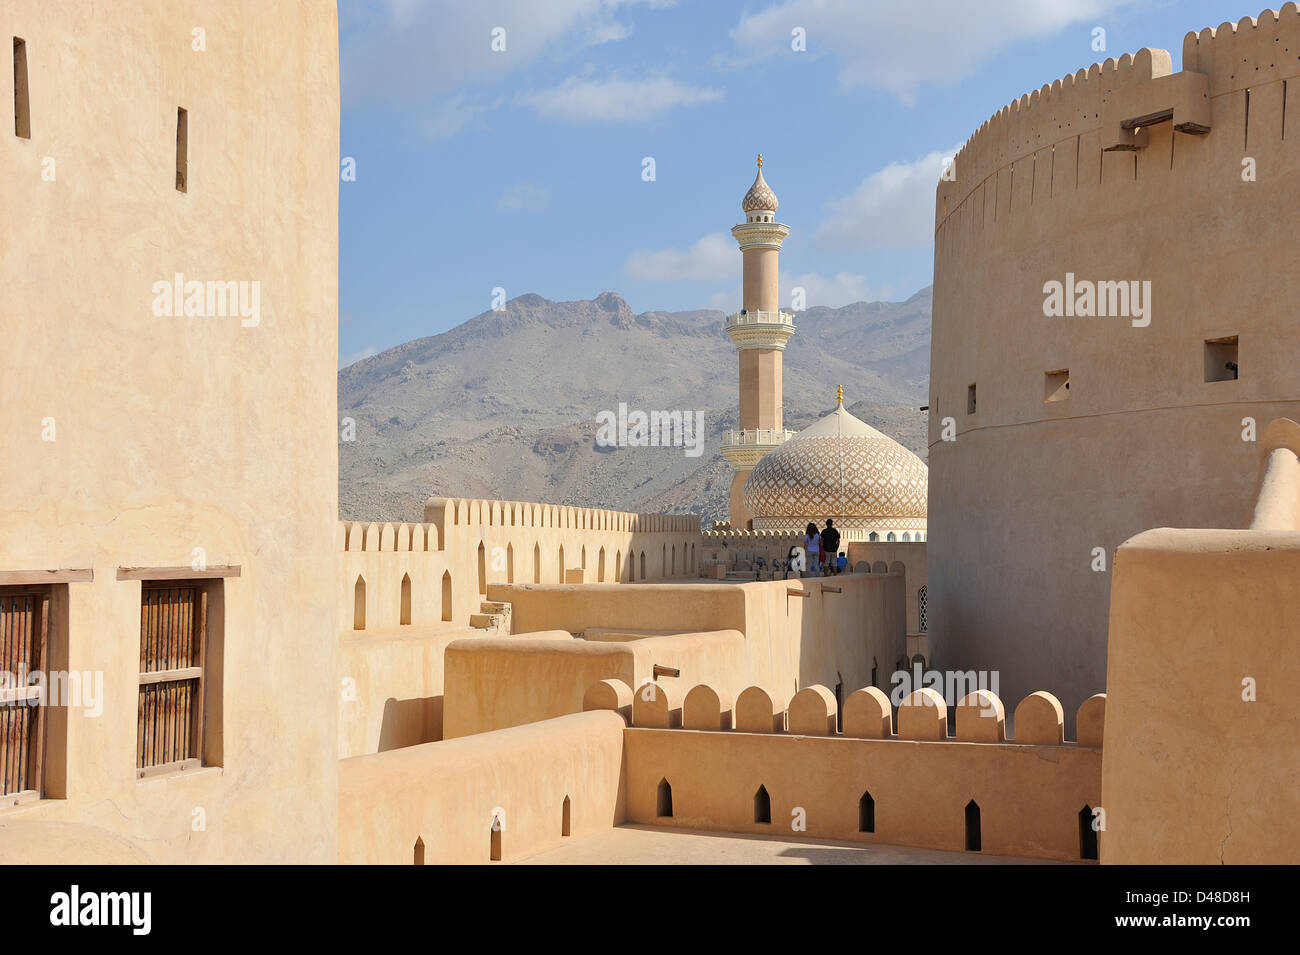 The stunning fort with a minaret, a mosque' s dome and stark mountains behind; Nizwa; Al Dakhiliyah, Oman. Stock Photo